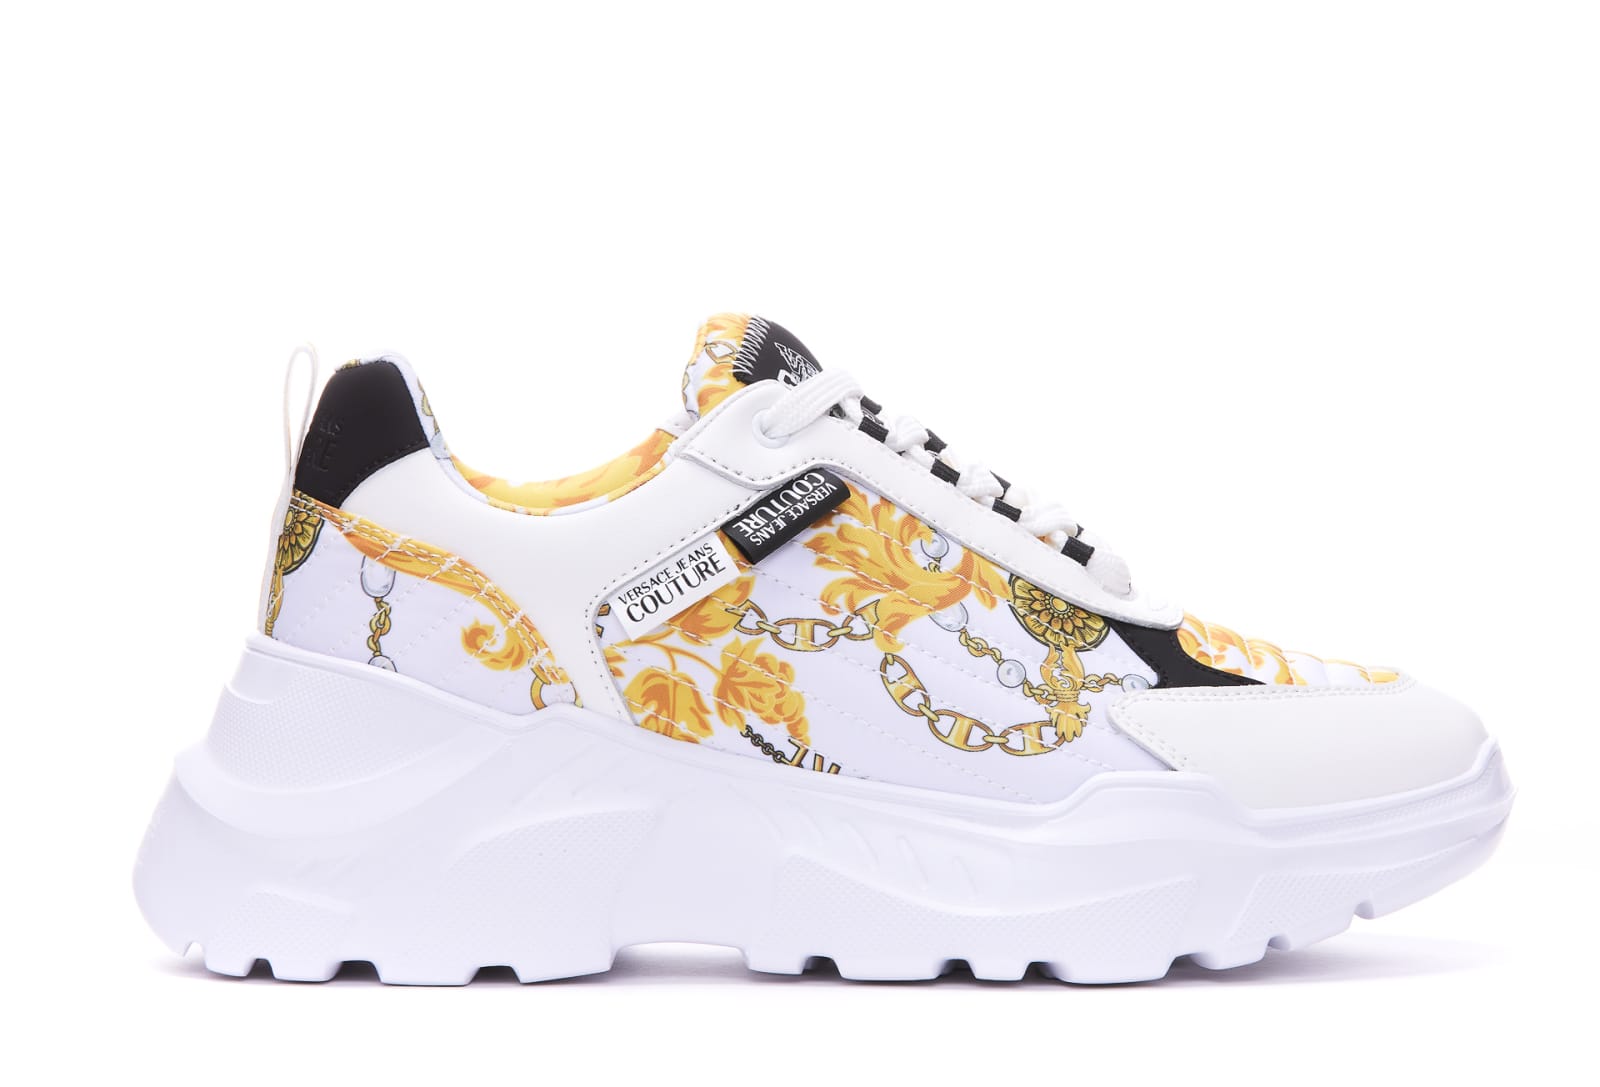 White & Gold Stargaze Sneakers by Versace Jeans Couture on Sale